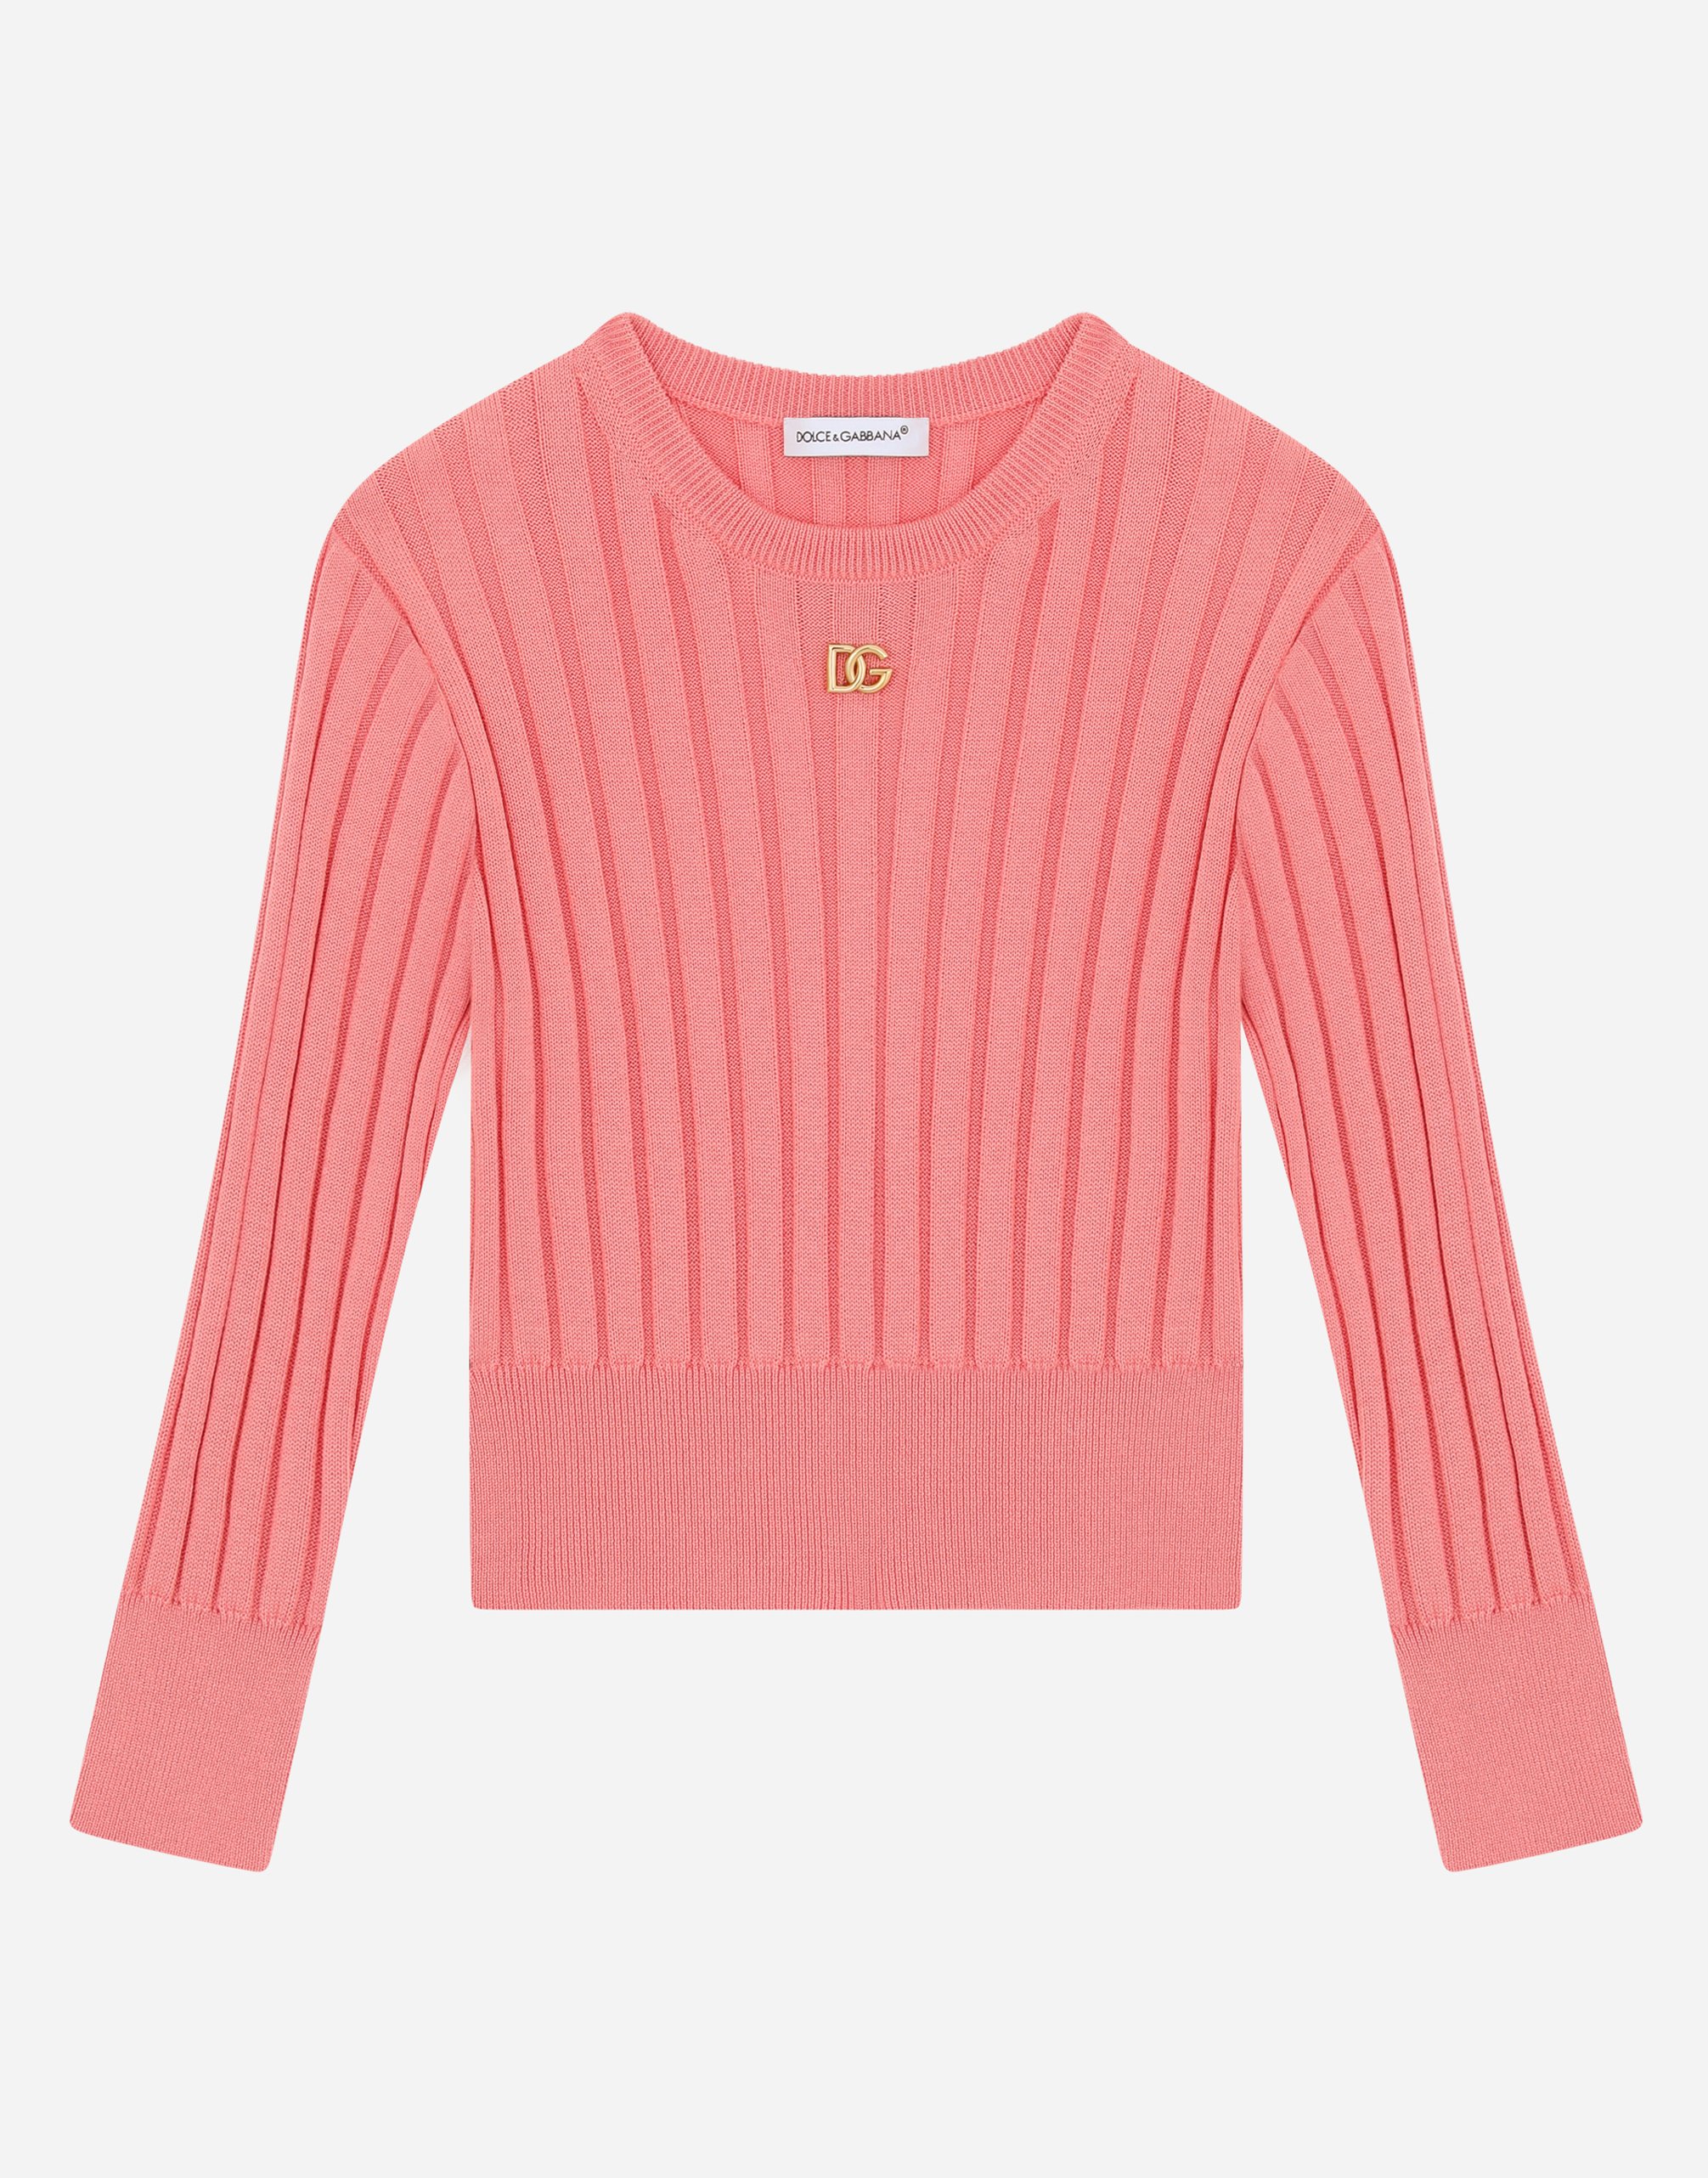 Cotton sweater with metal DG logo in Pink